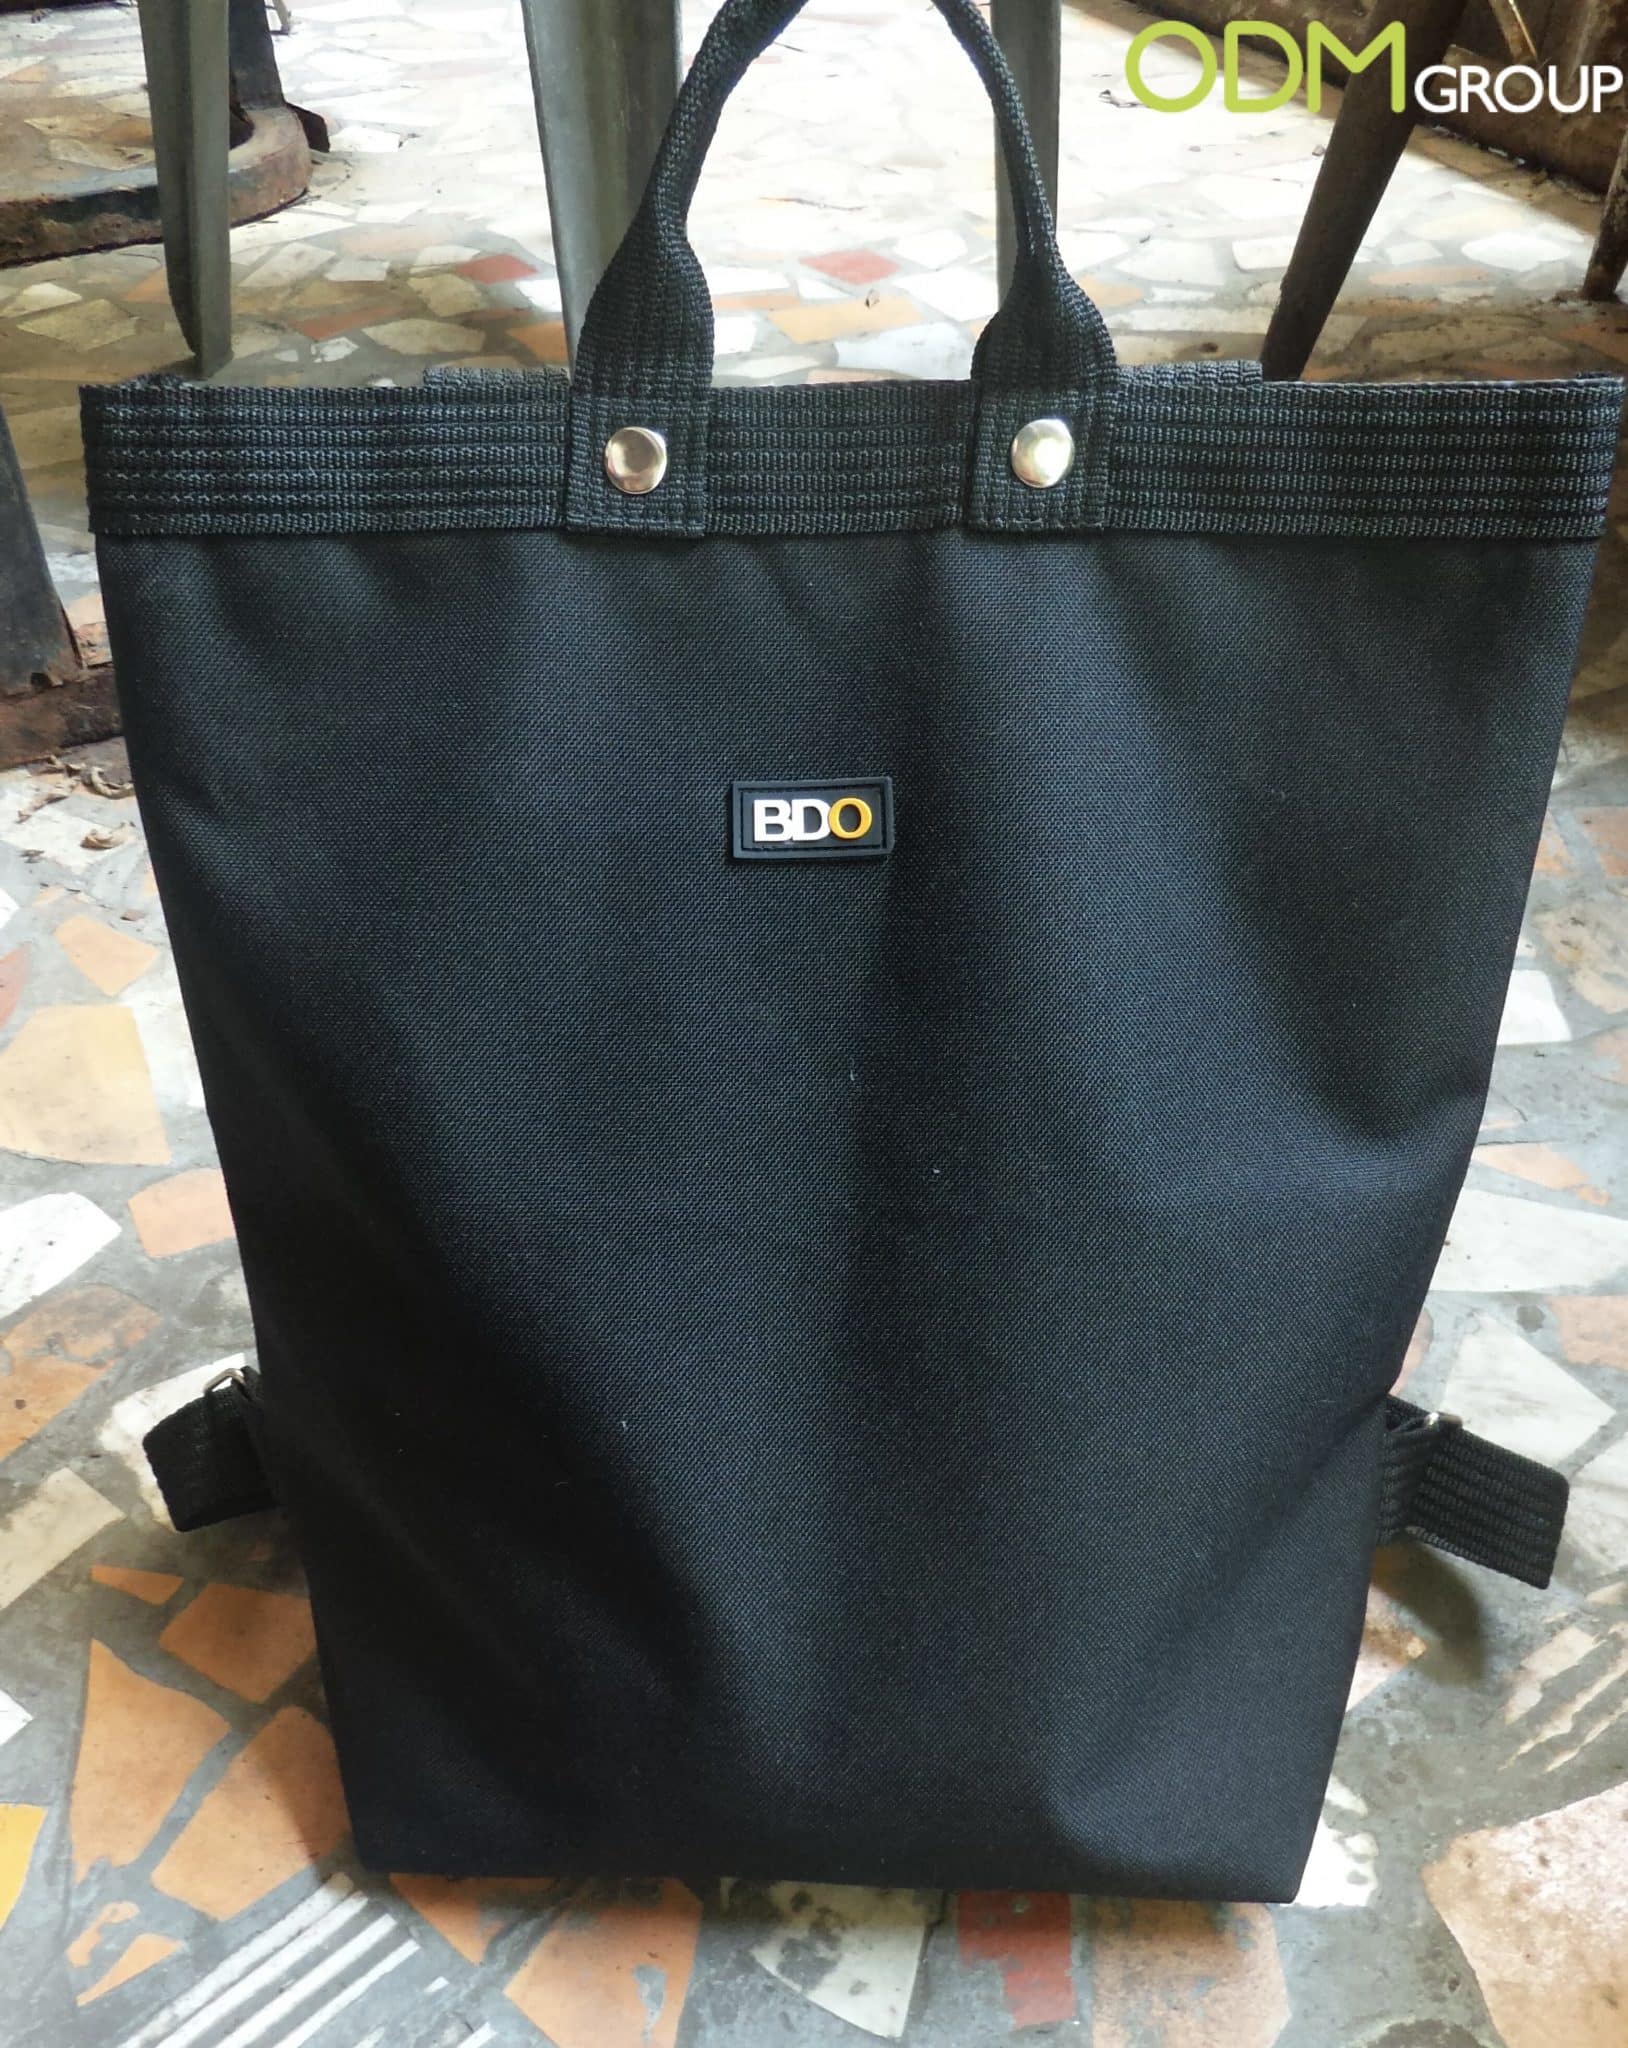 branded tote bags